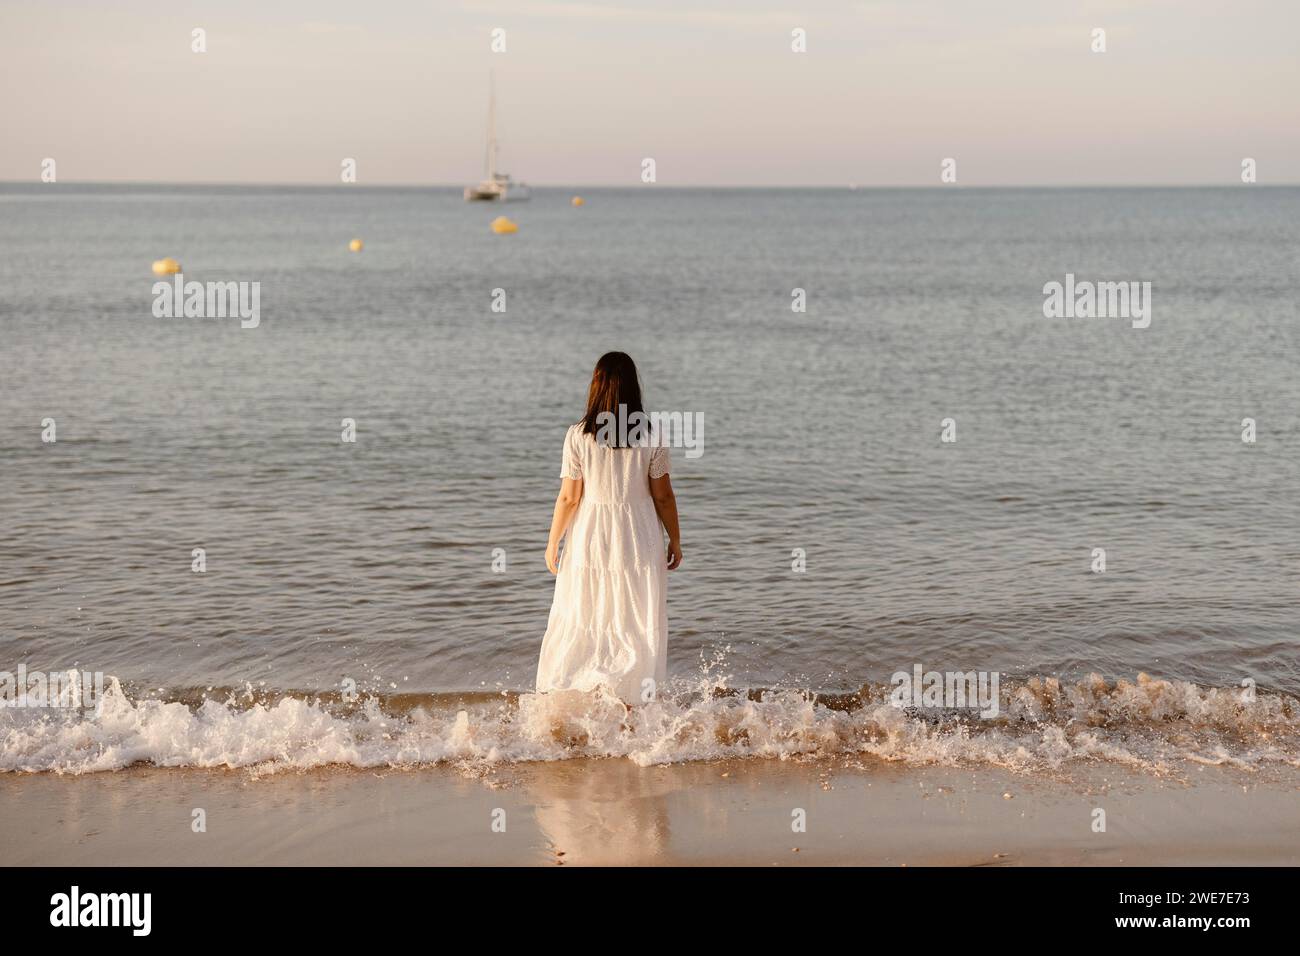 Luxury portrait of woman in white dress at the beach, Albufeira, Algarve, Portugal Stock Photo